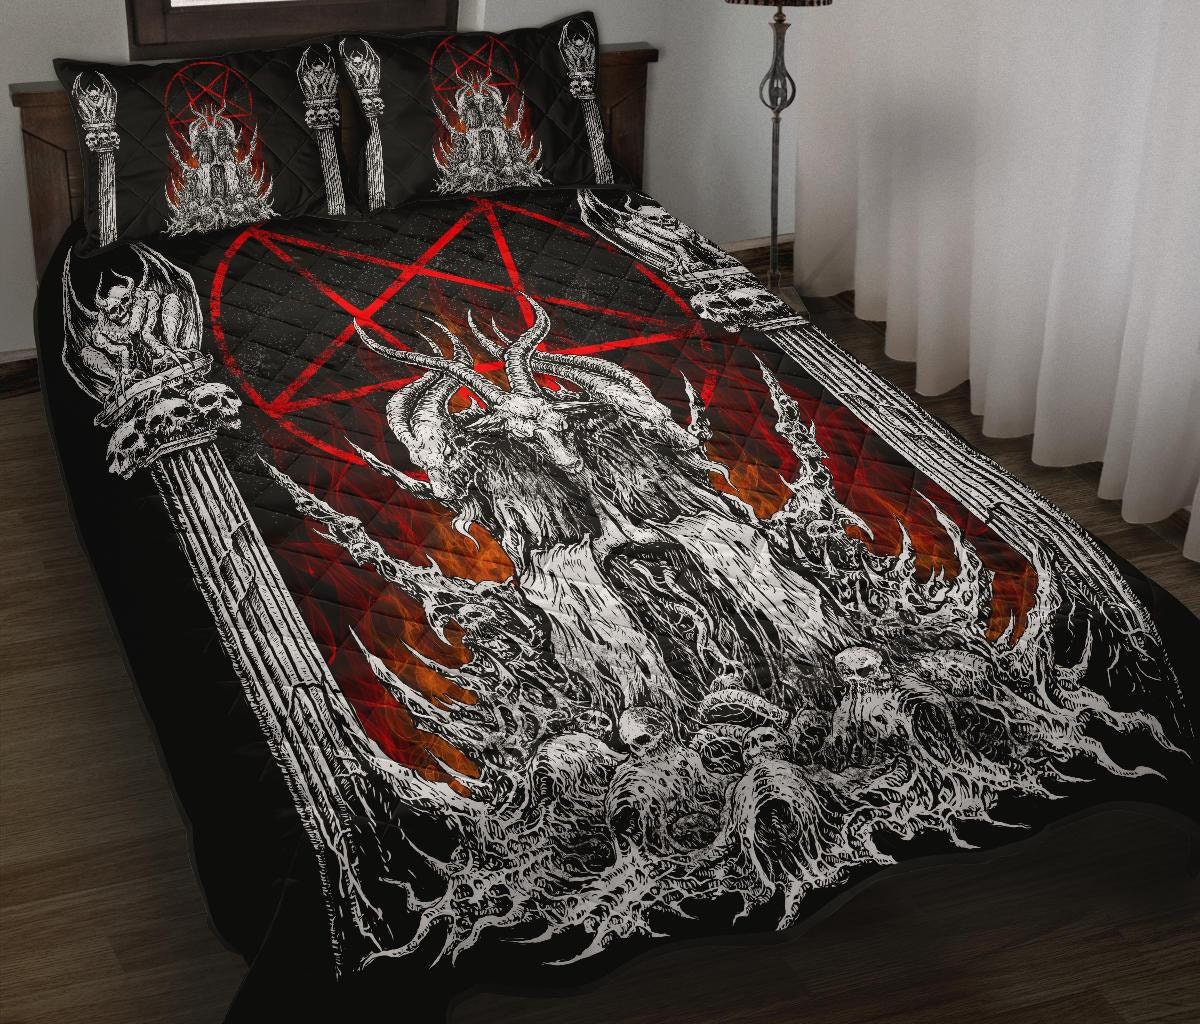 Skull Satanic Goat Zombie Crow Feast Large Wall Tapestry-satanic Goth  Occult Wall Decor 